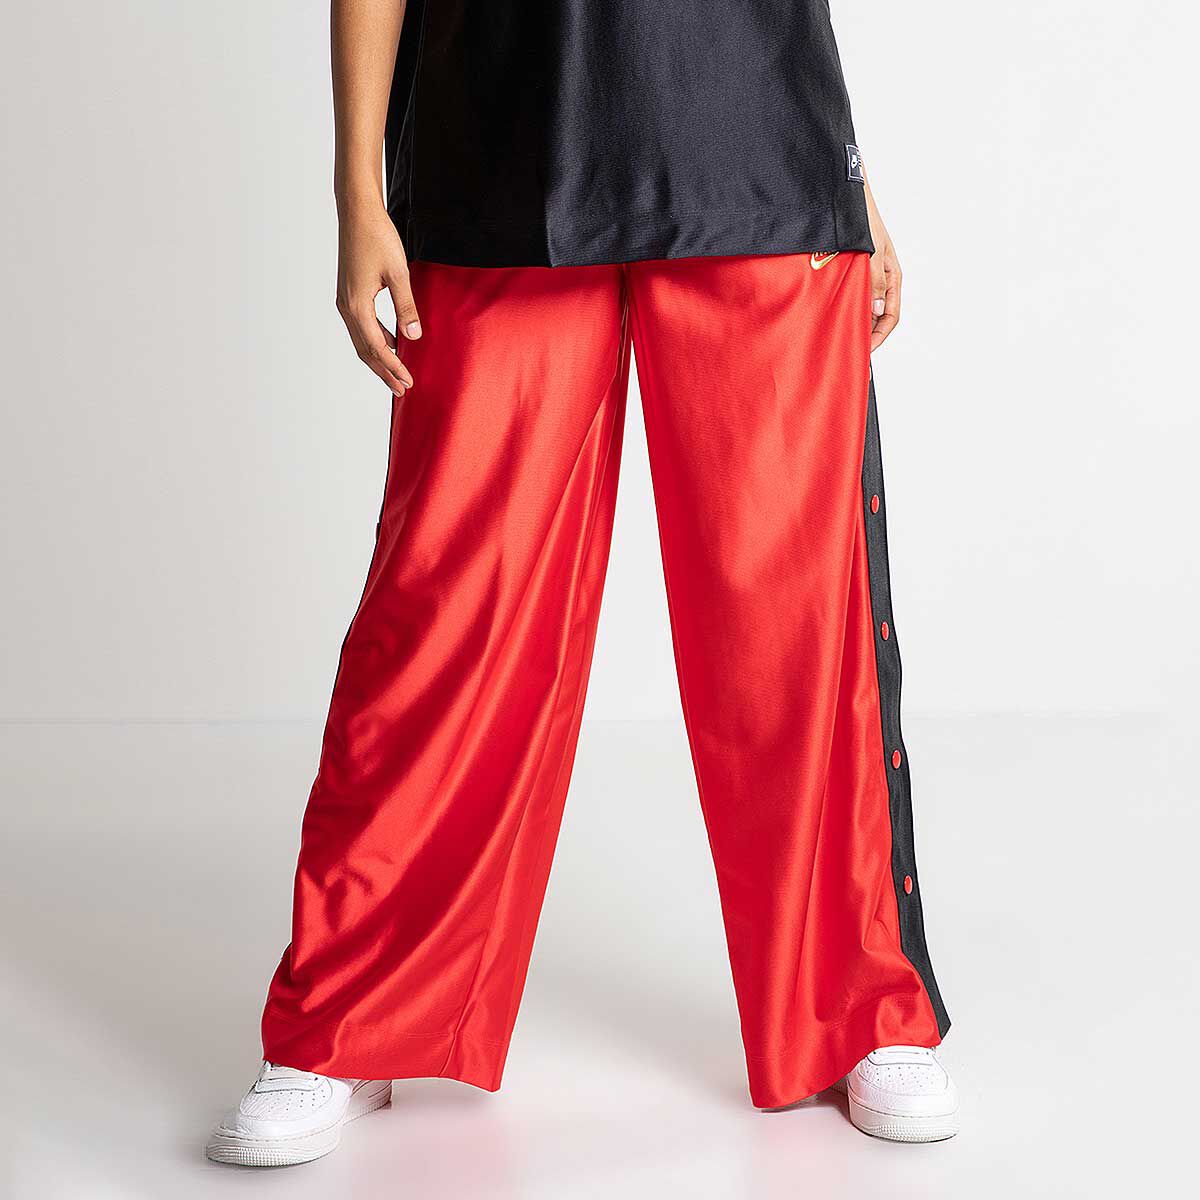 Stay stylish and comfortable in these Nike Sportswear Woven Tearaway  Basketball Pants